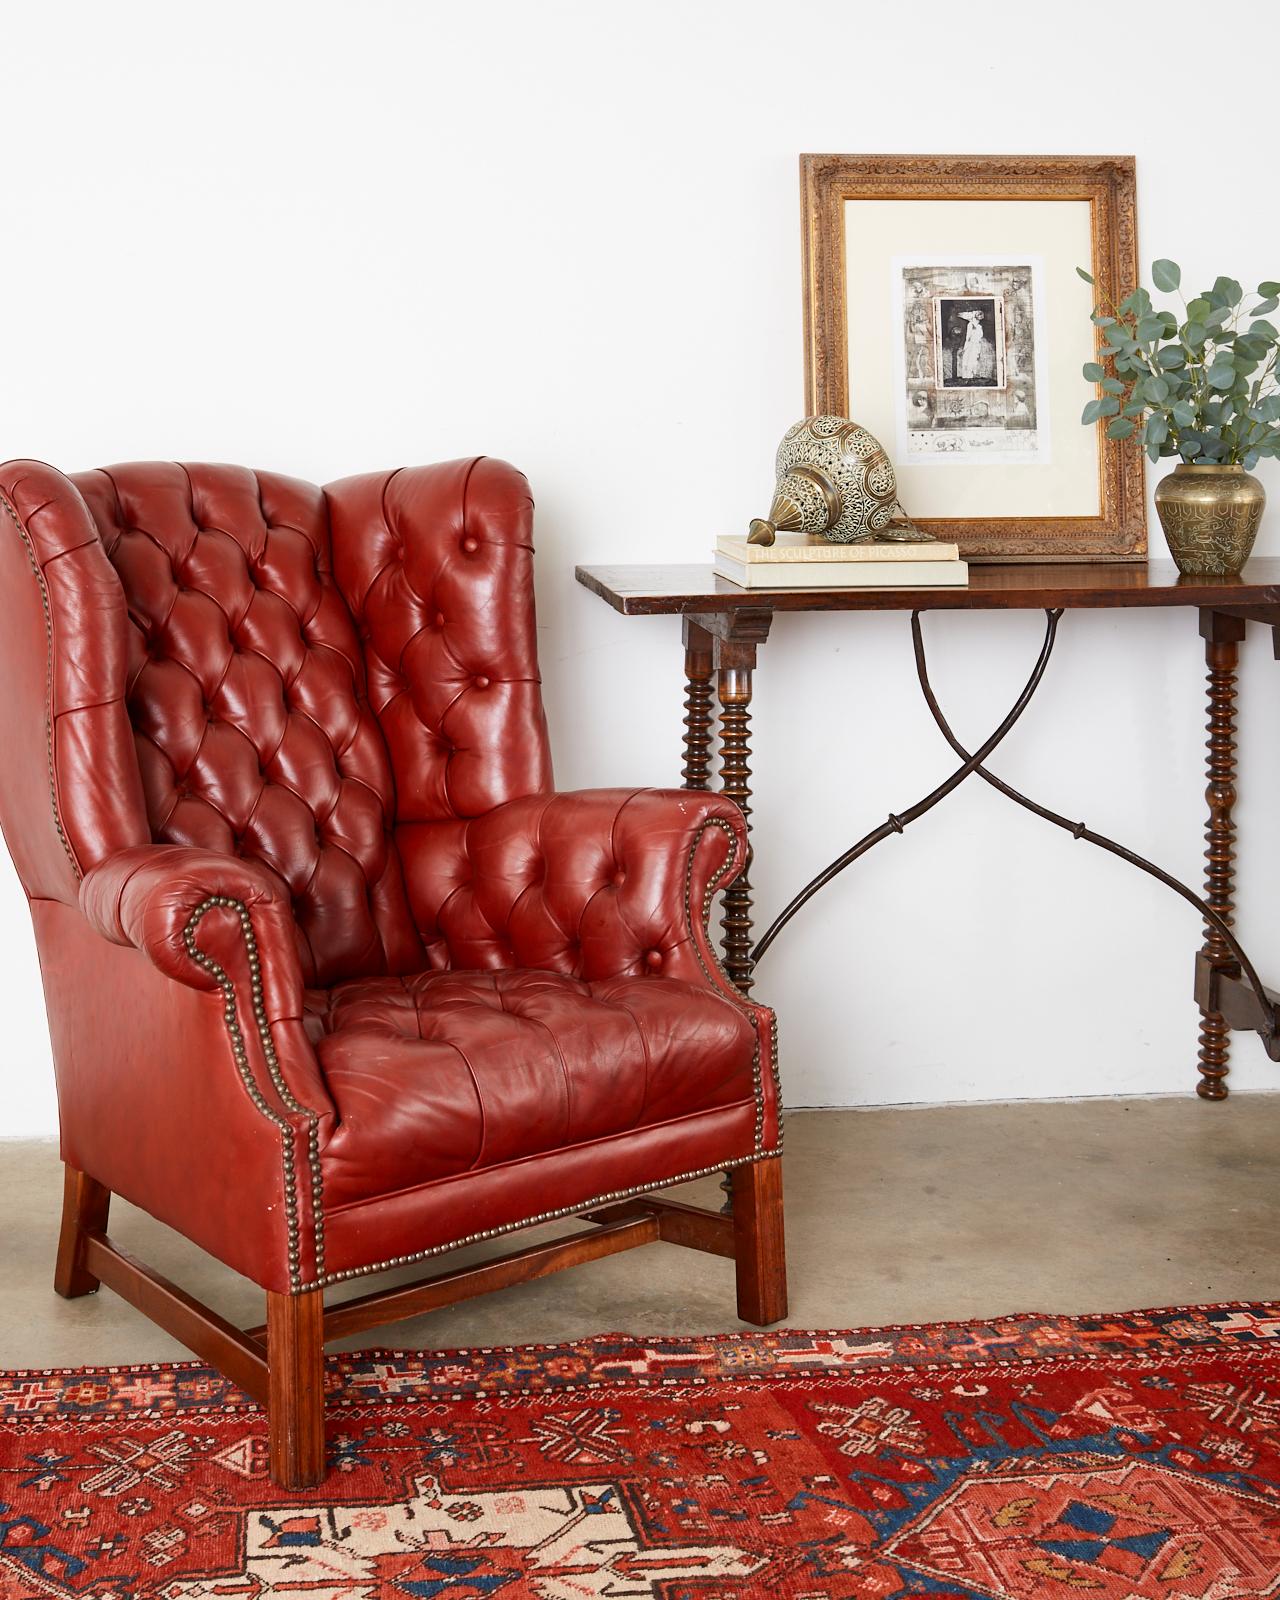 Spectacular pair of midcentury English tufted red leather wingback armchairs made in the Georgian taste. Featuring a generous mahogany frame with a deep seat covered with top grain English leather having a lovely worn patina. The leather is bordered